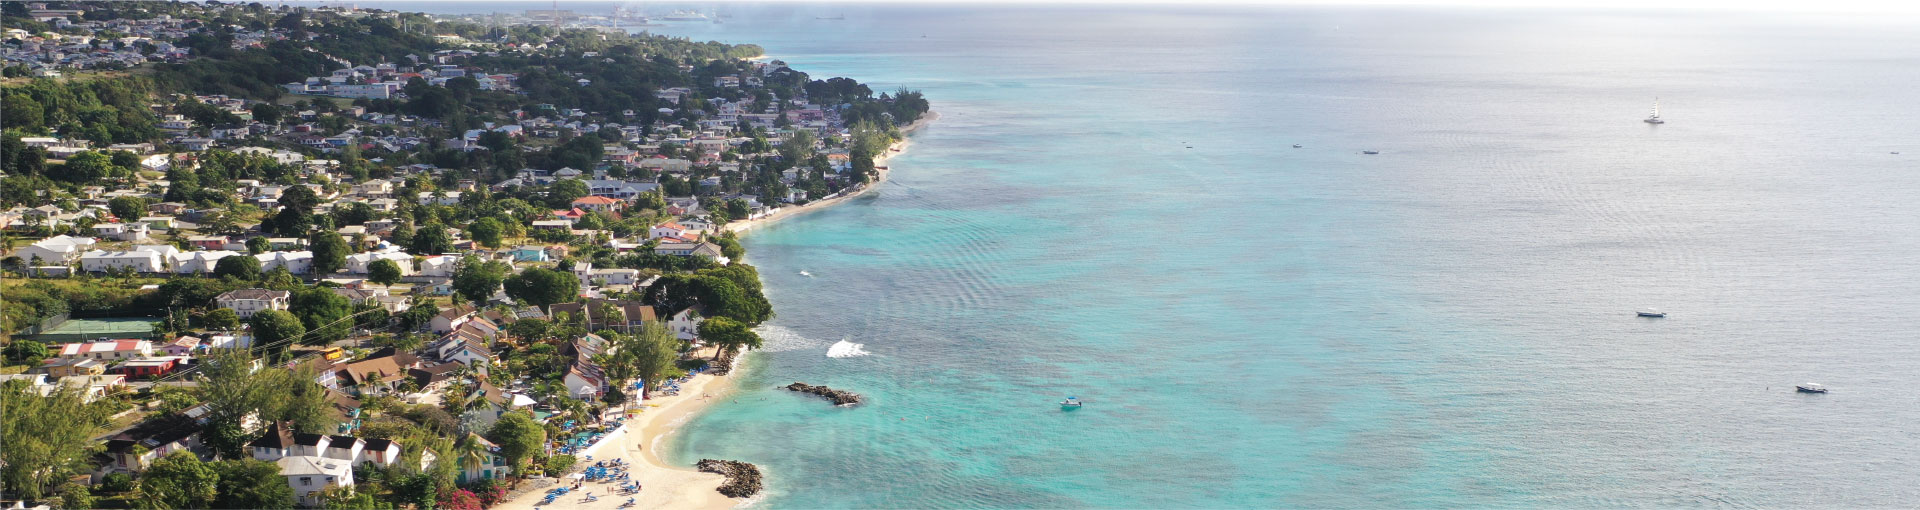 Experience Barbados  & Life on an island|Experience Barbados  & Life on an island